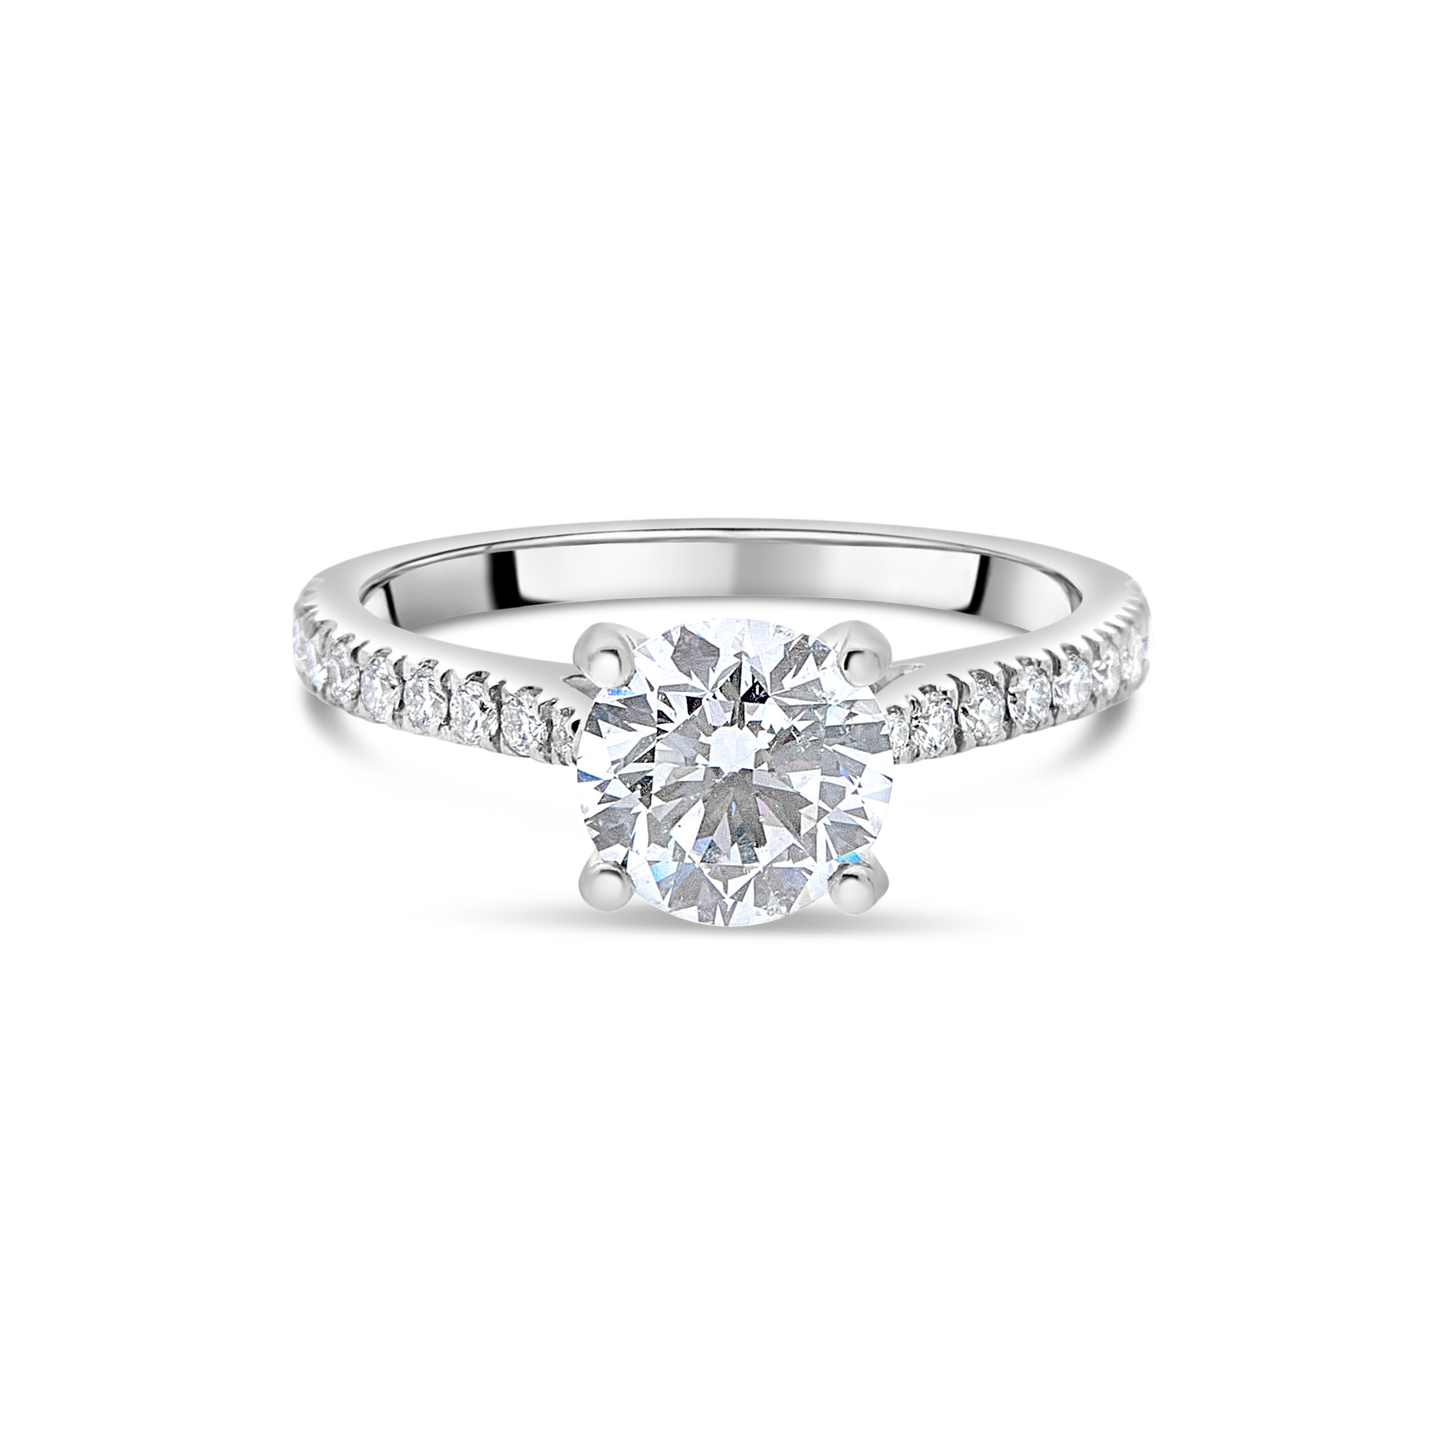 The "J'adore" with Round Brilliant and Pavé Diamond Band